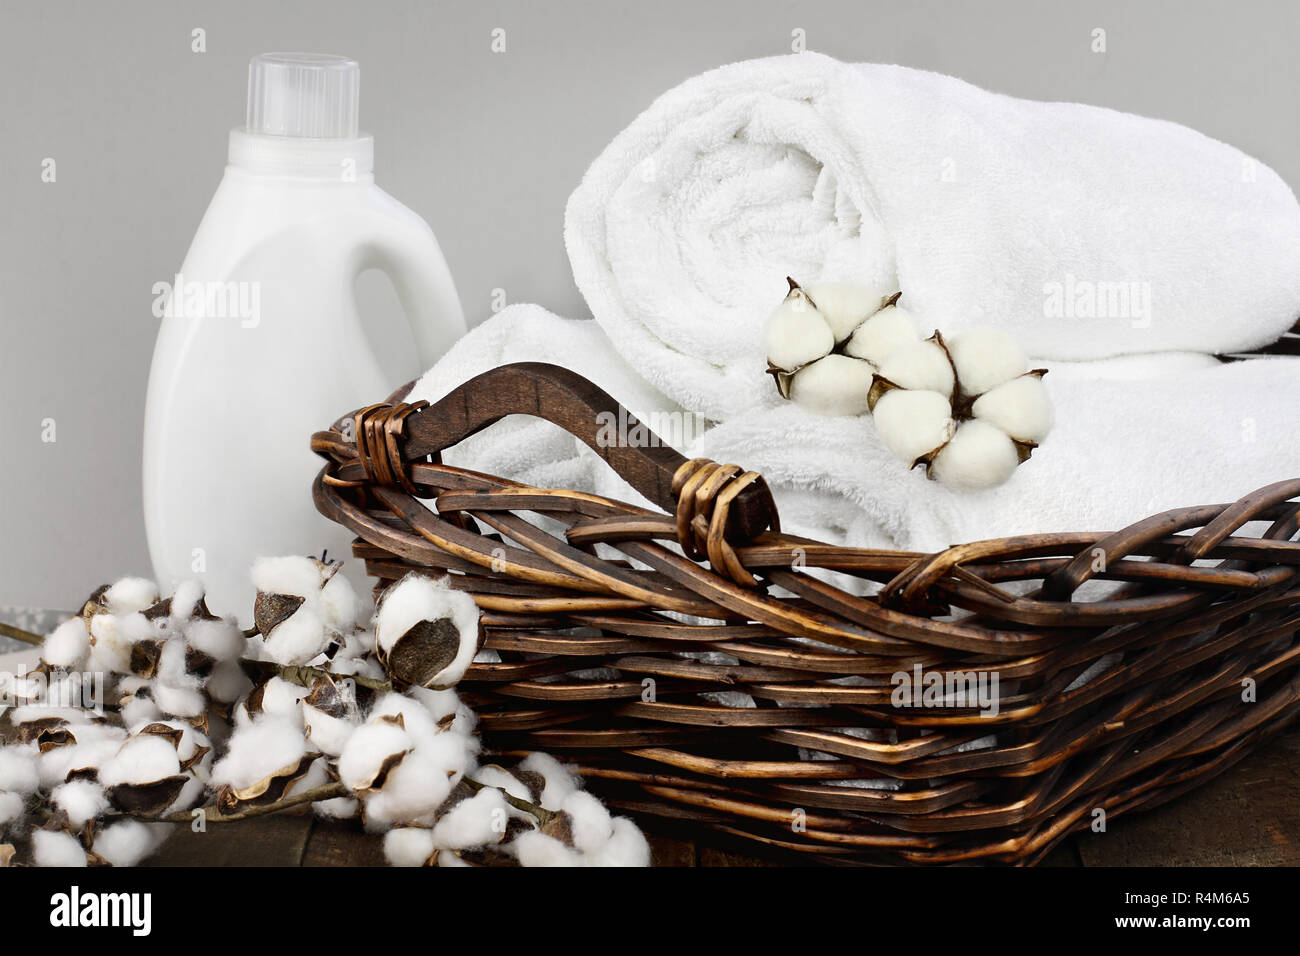 https://c8.alamy.com/comp/R4M6A5/laundry-basket-filled-white-fluffy-towels-cotton-flowers-and-a-bottle-of-liquid-soap-against-a-blurred-grey-background-R4M6A5.jpg